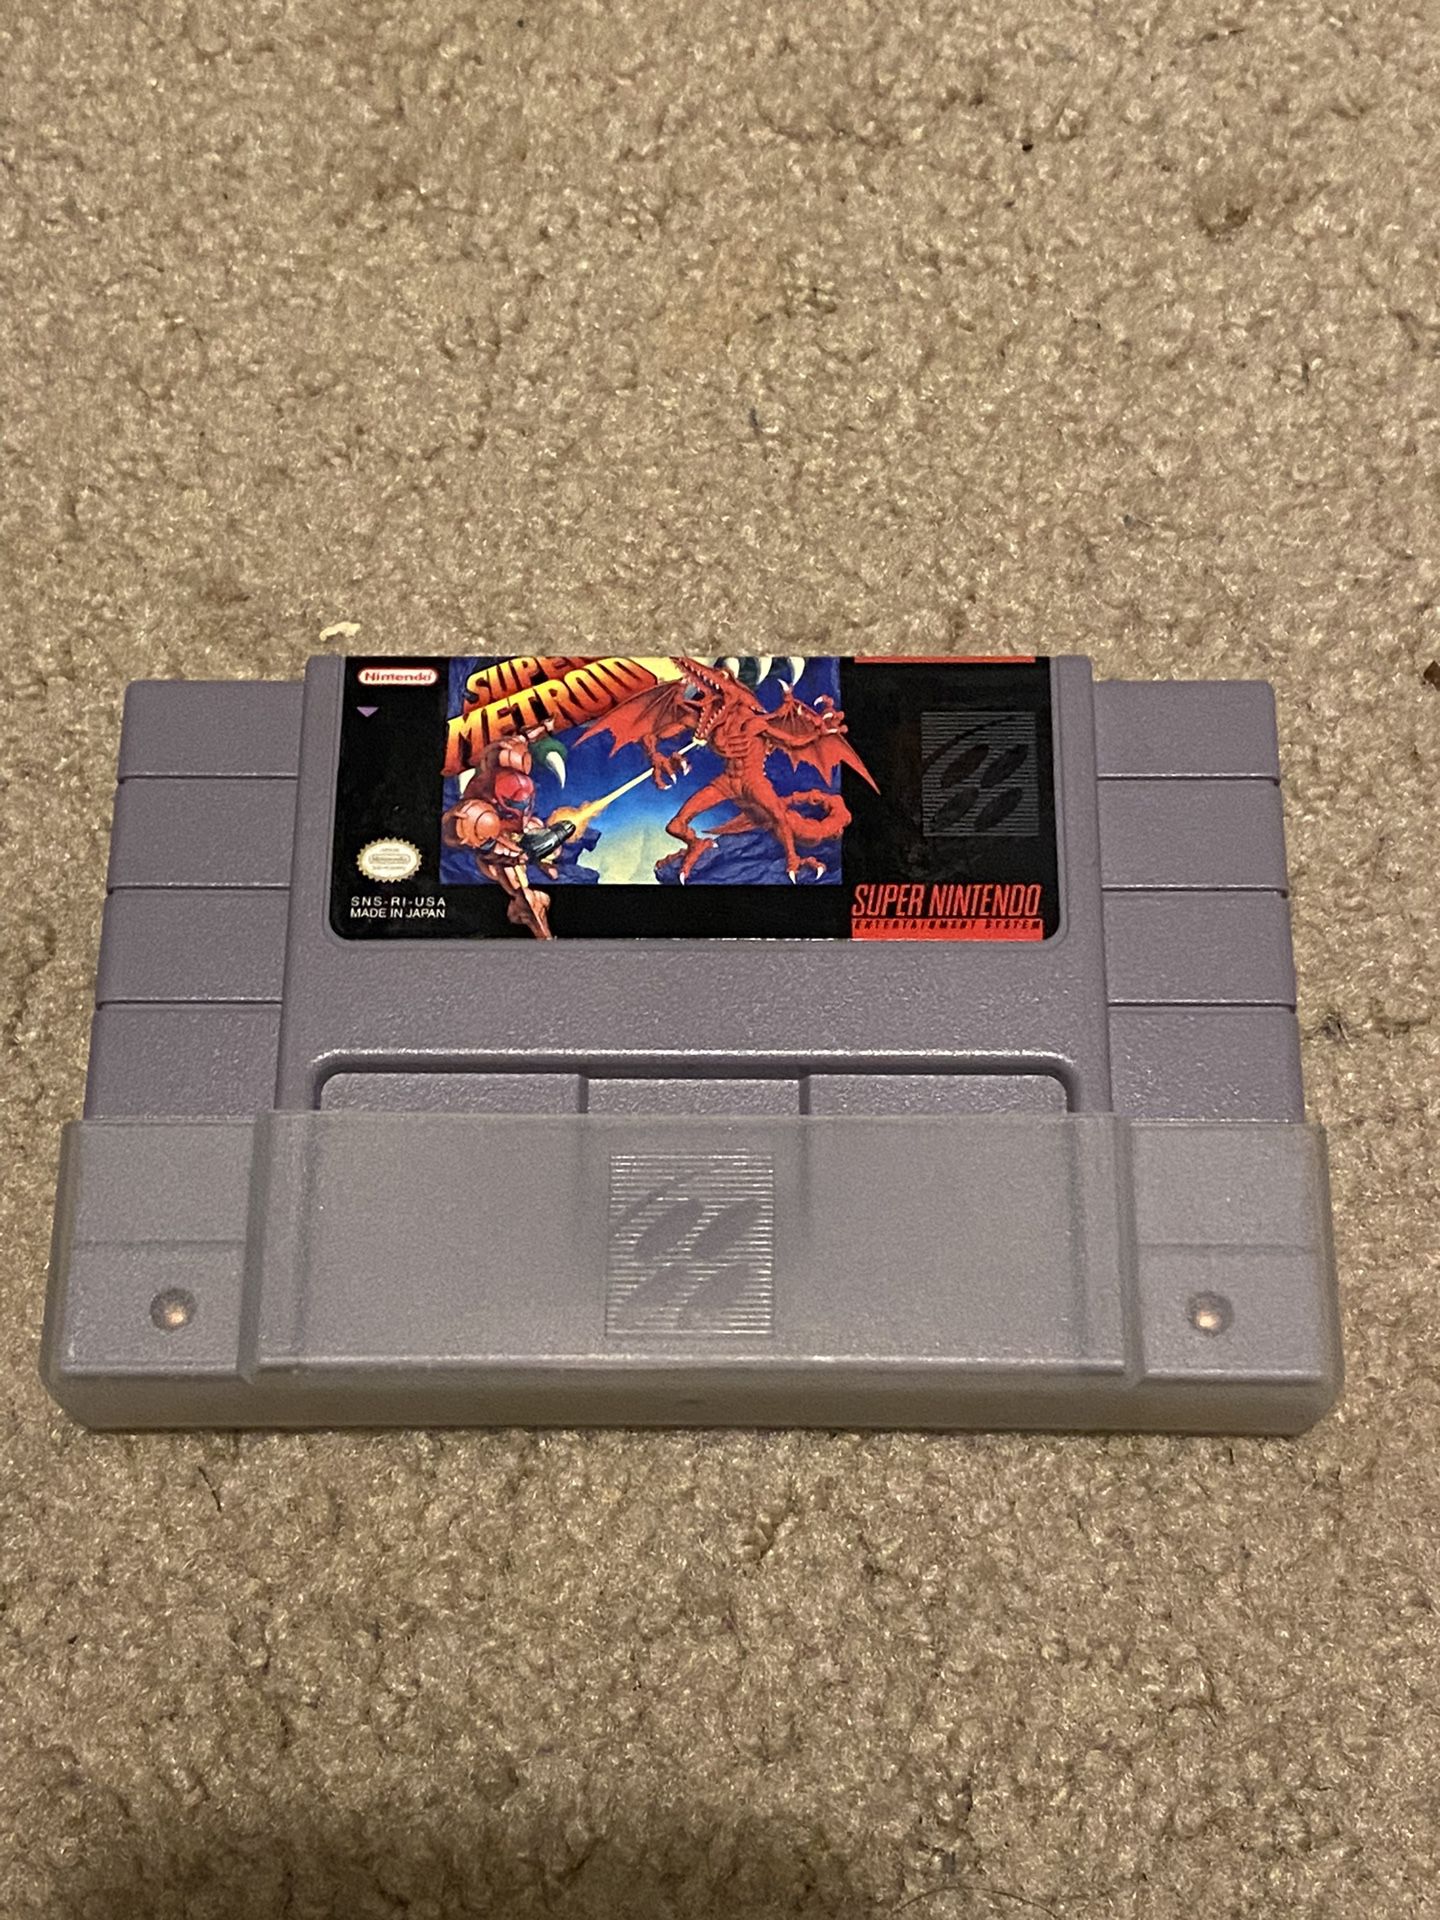 Super Metroid! Great Condition!